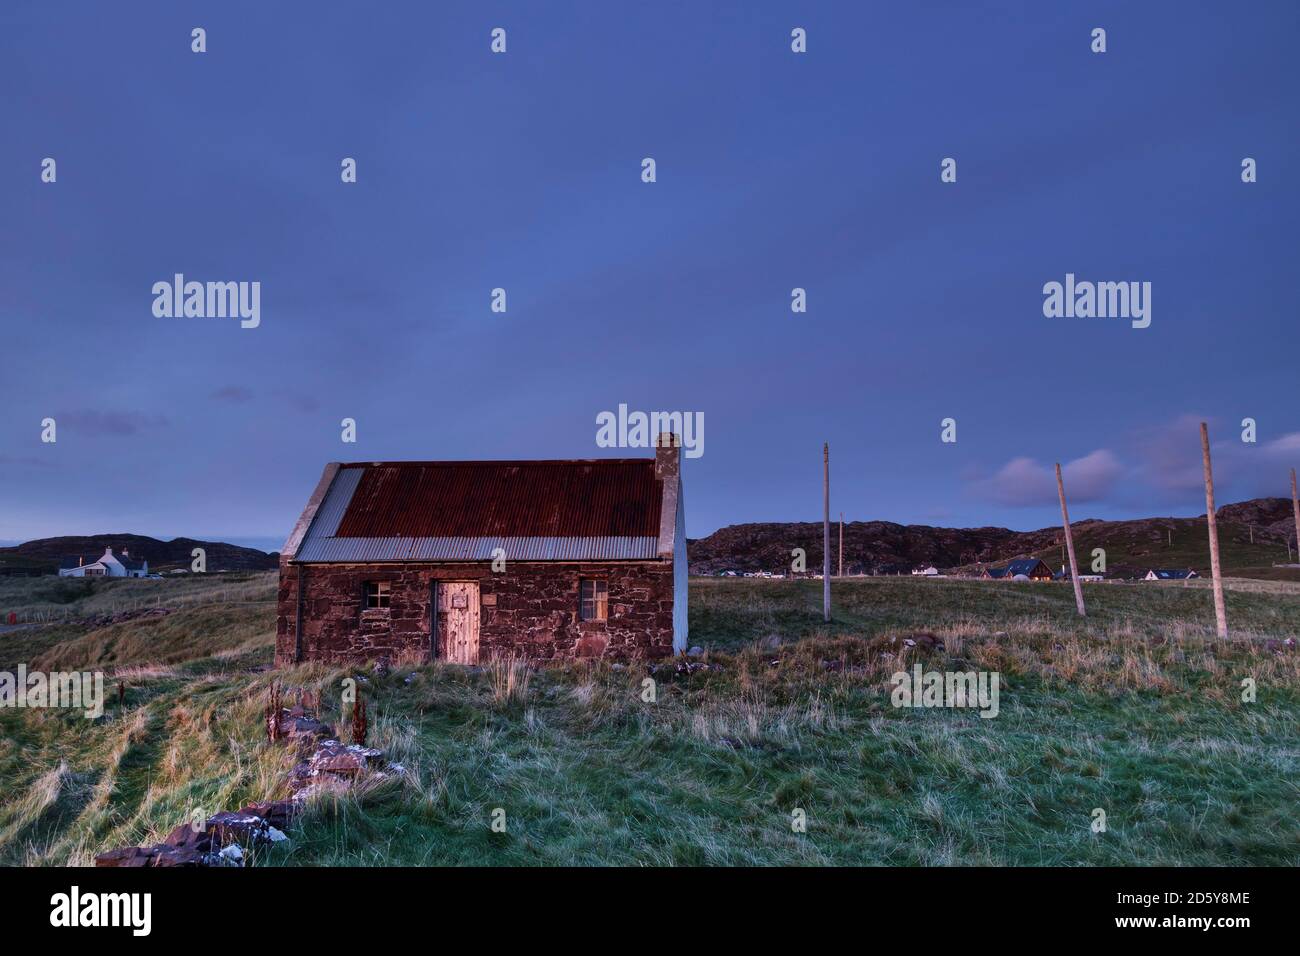 The Clachtoll Salmon Fishing Bothy with Net Drying Posts as Night Falls Over Clachtoll, Assynt, NW Highlands, Scotland, UK Stock Photo